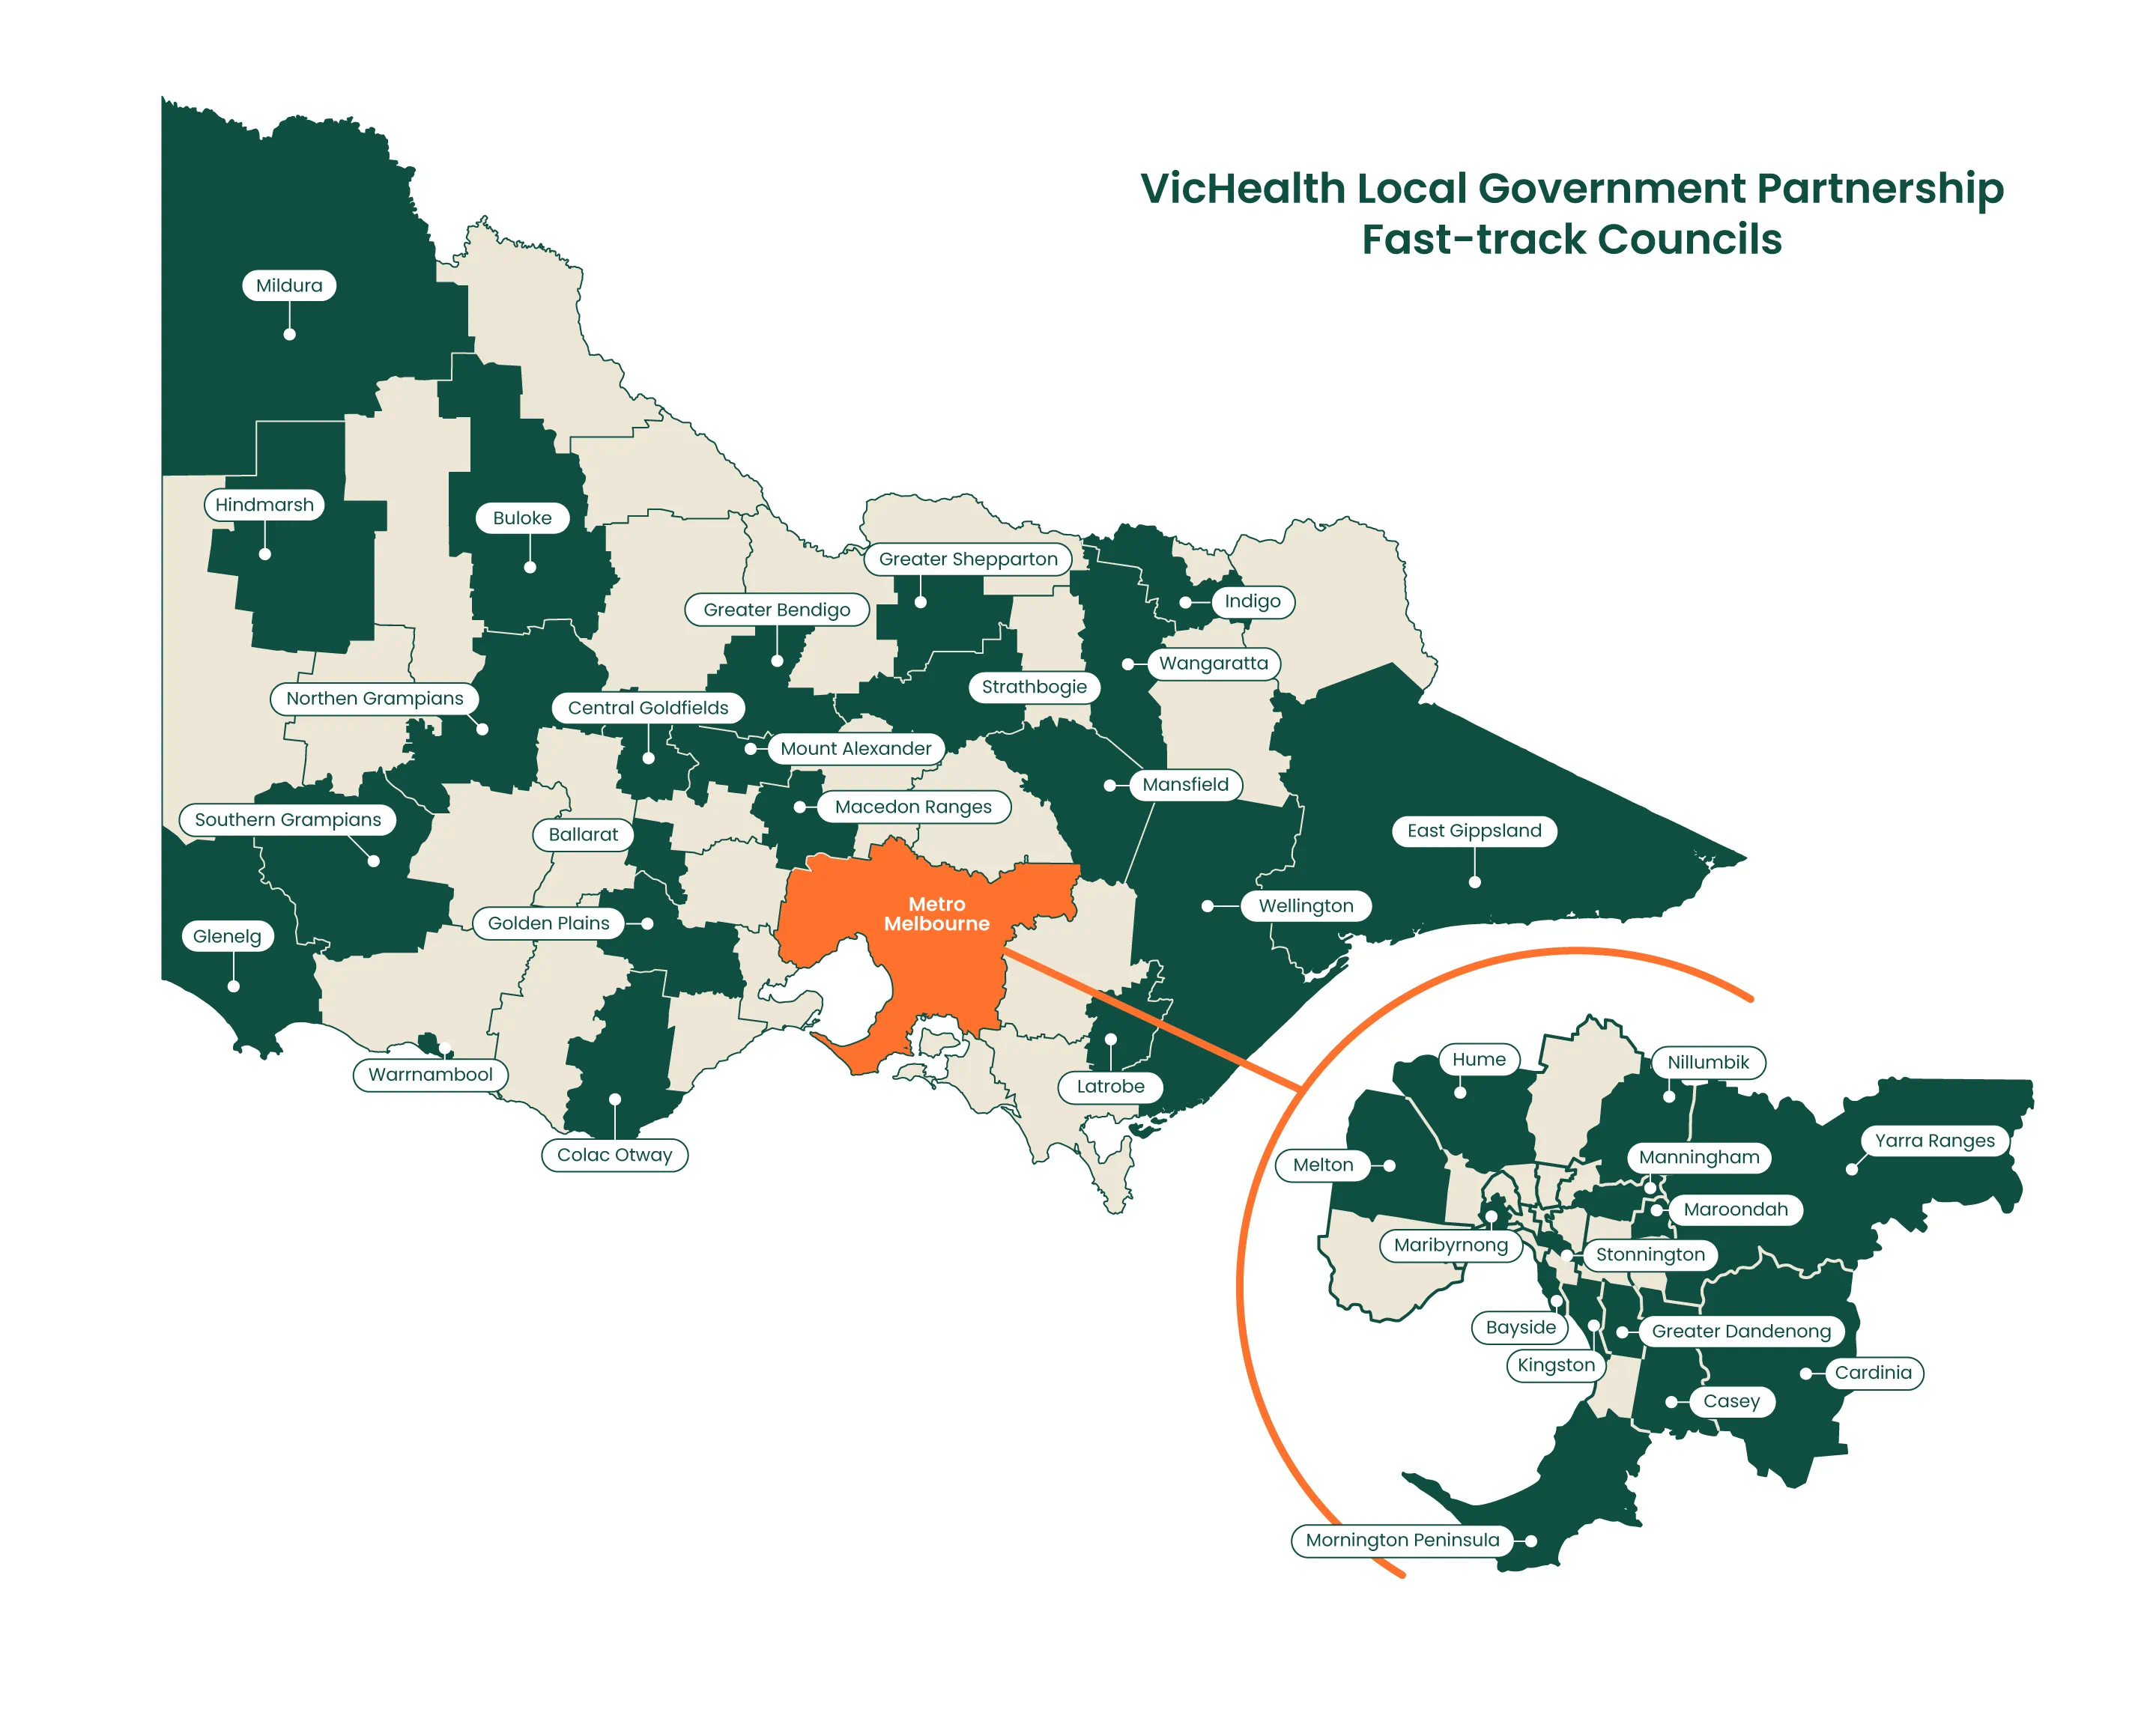 Victorian Local Government Partnerships map - refer to text on page for full list of recipients